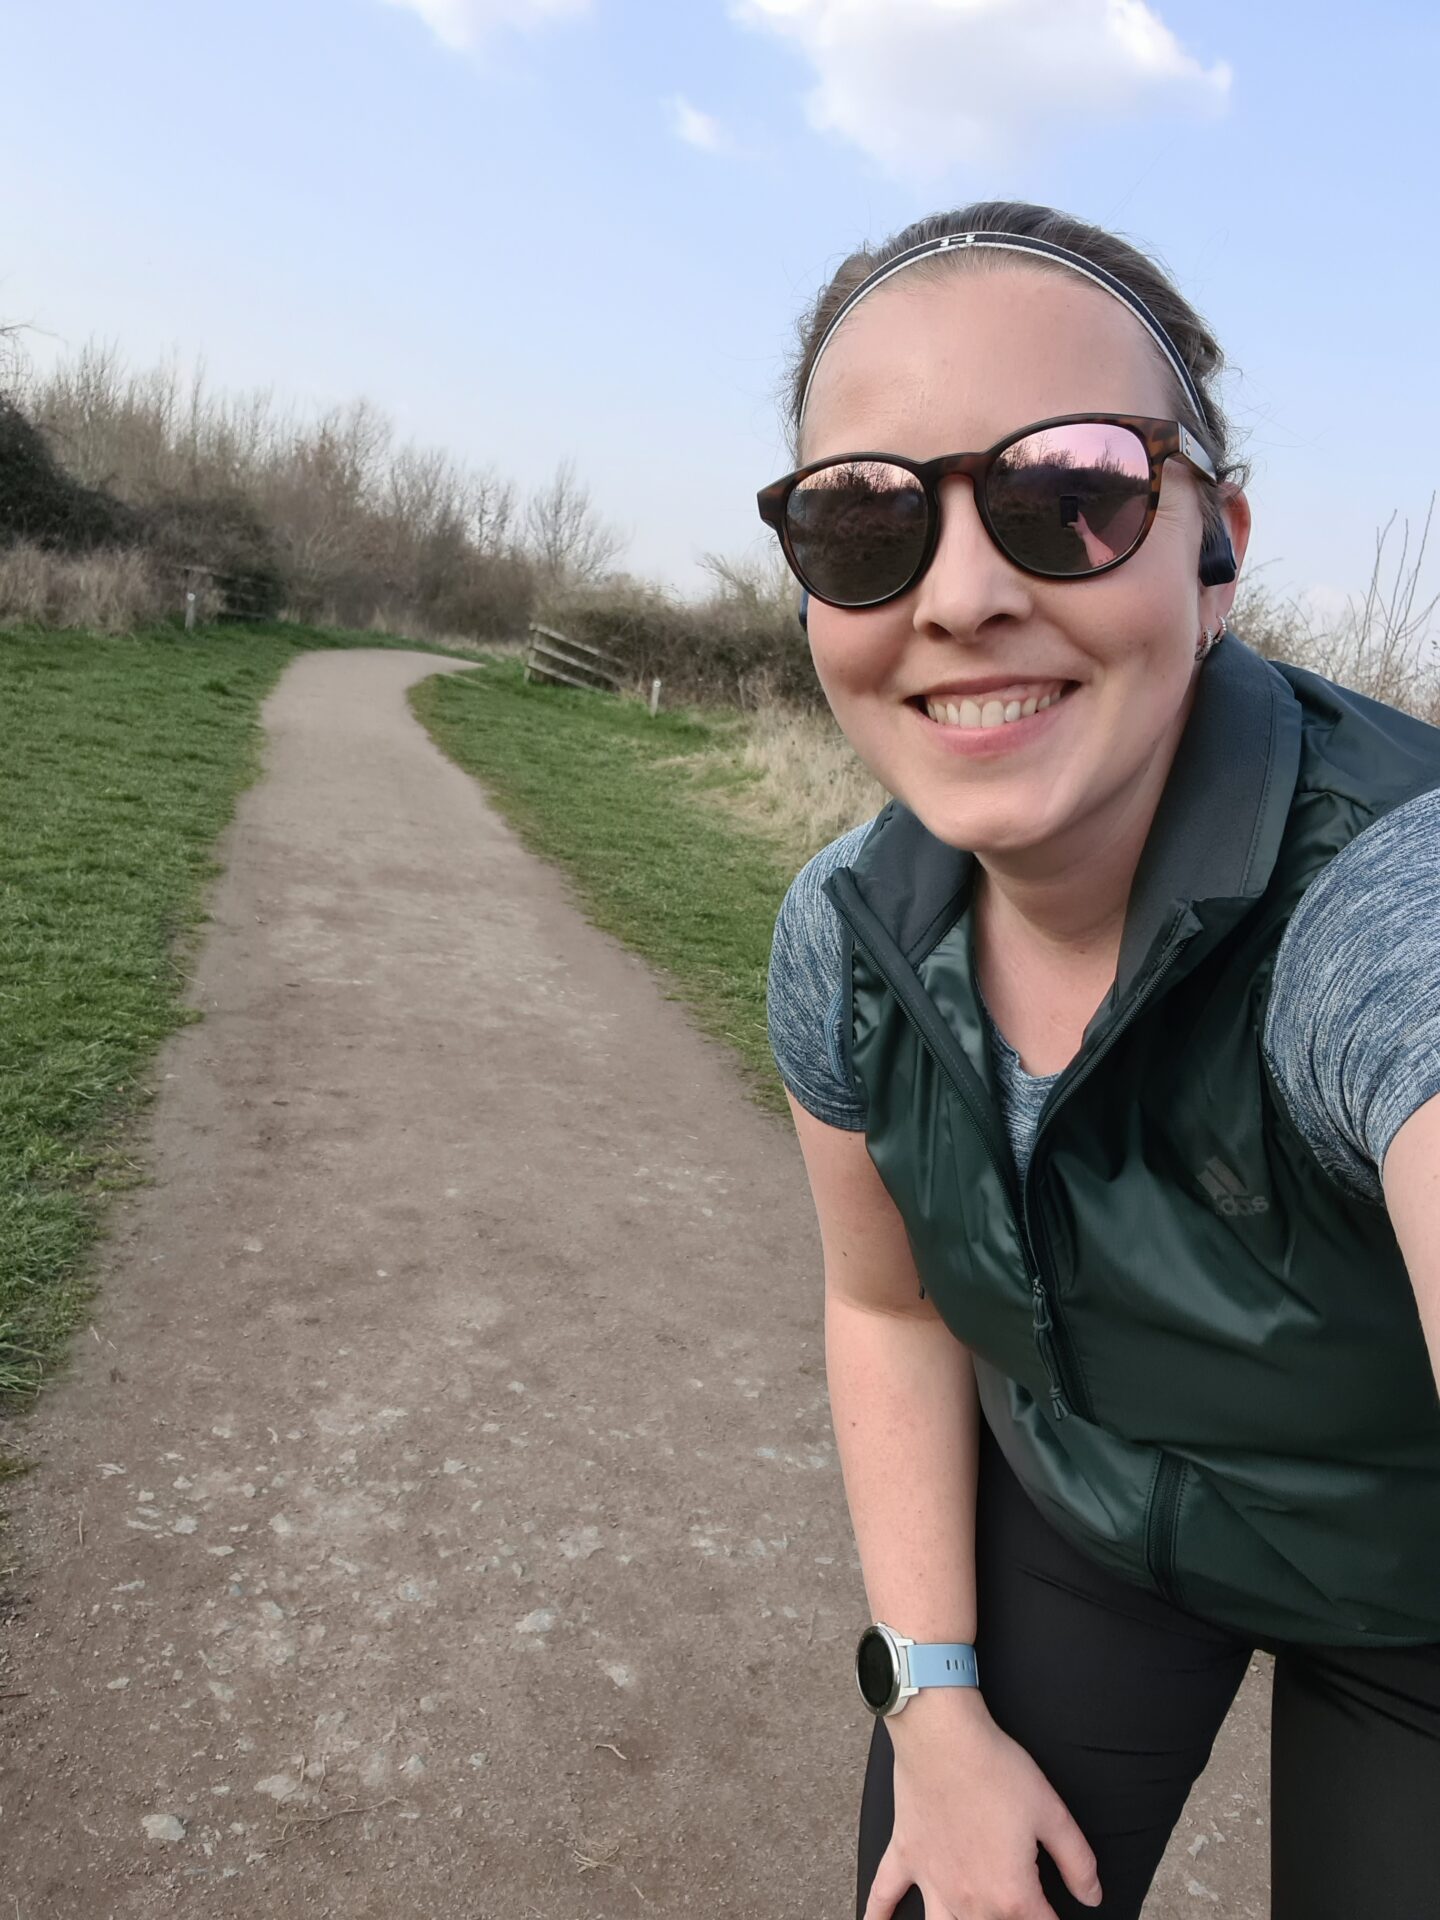 Selfie of woman wearing green running gilet and sunglasses. 